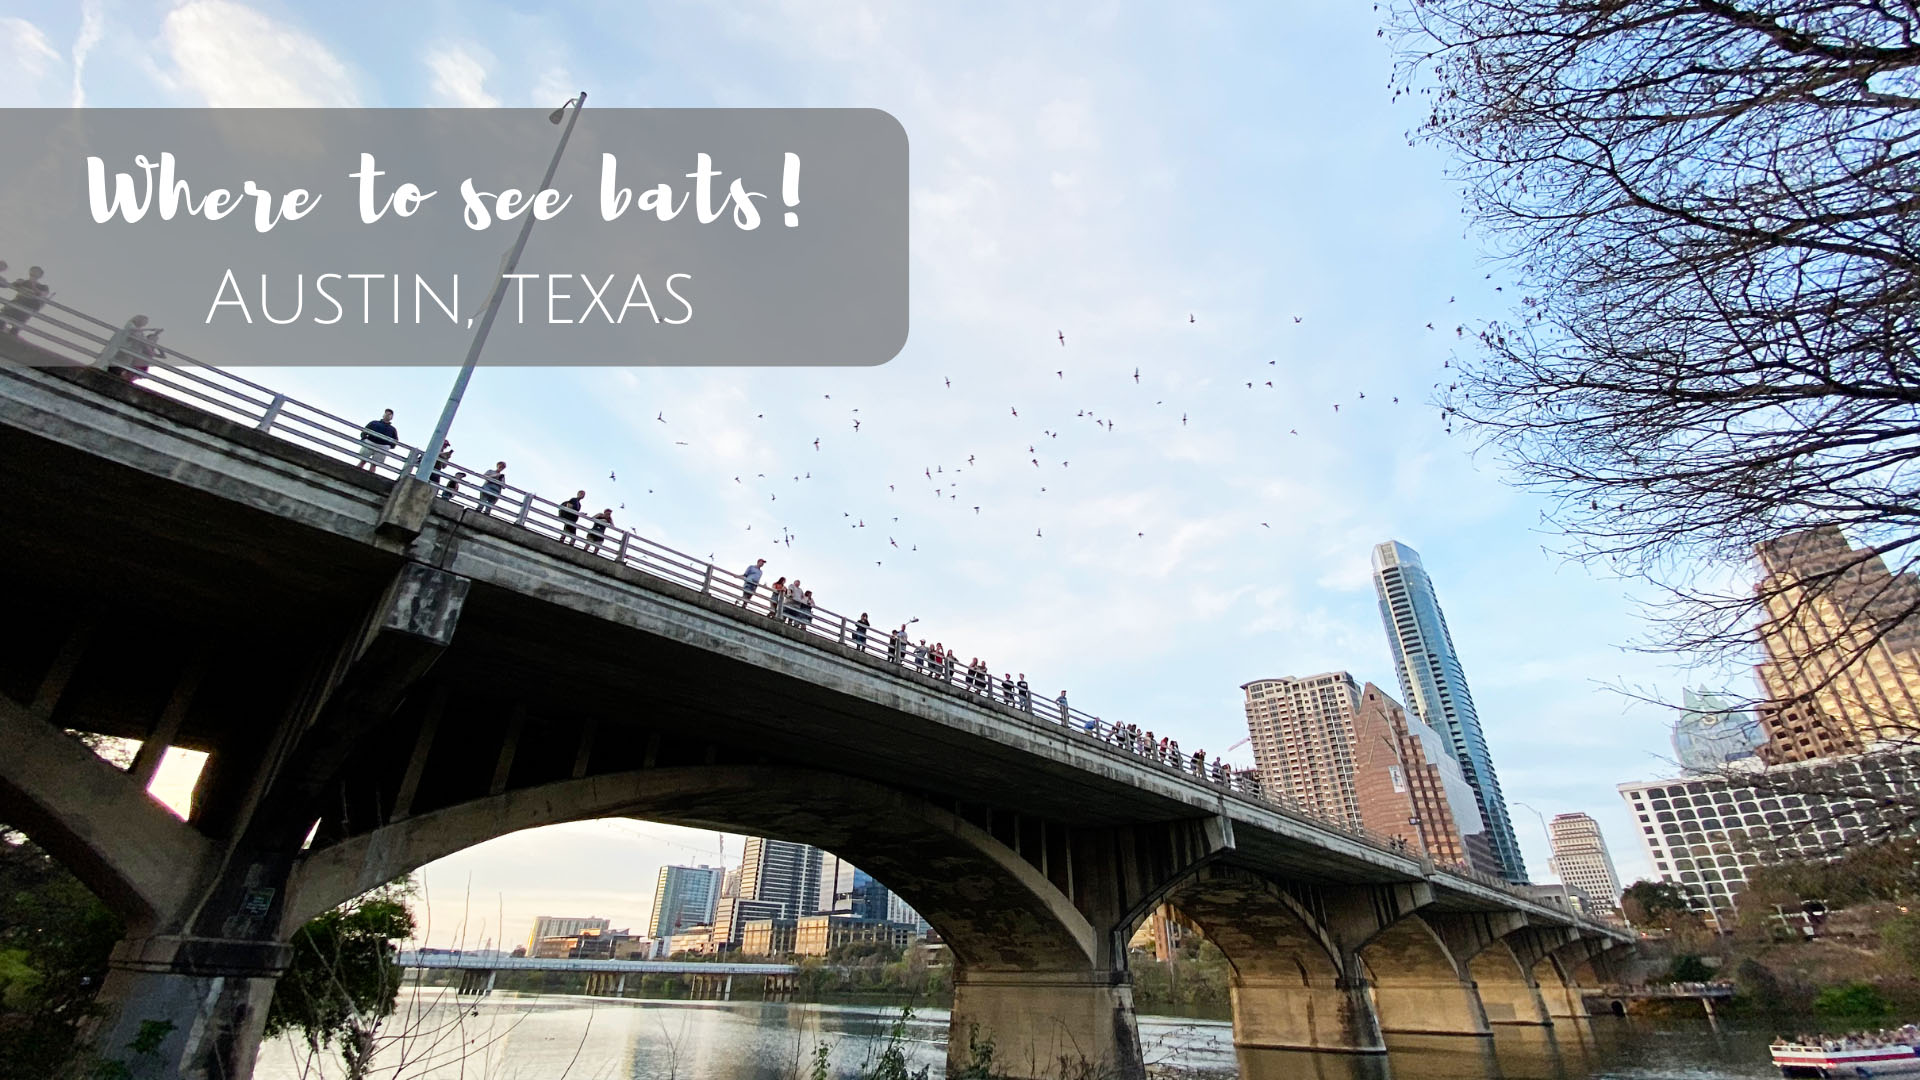 Where to see bats in Austin, Texas!